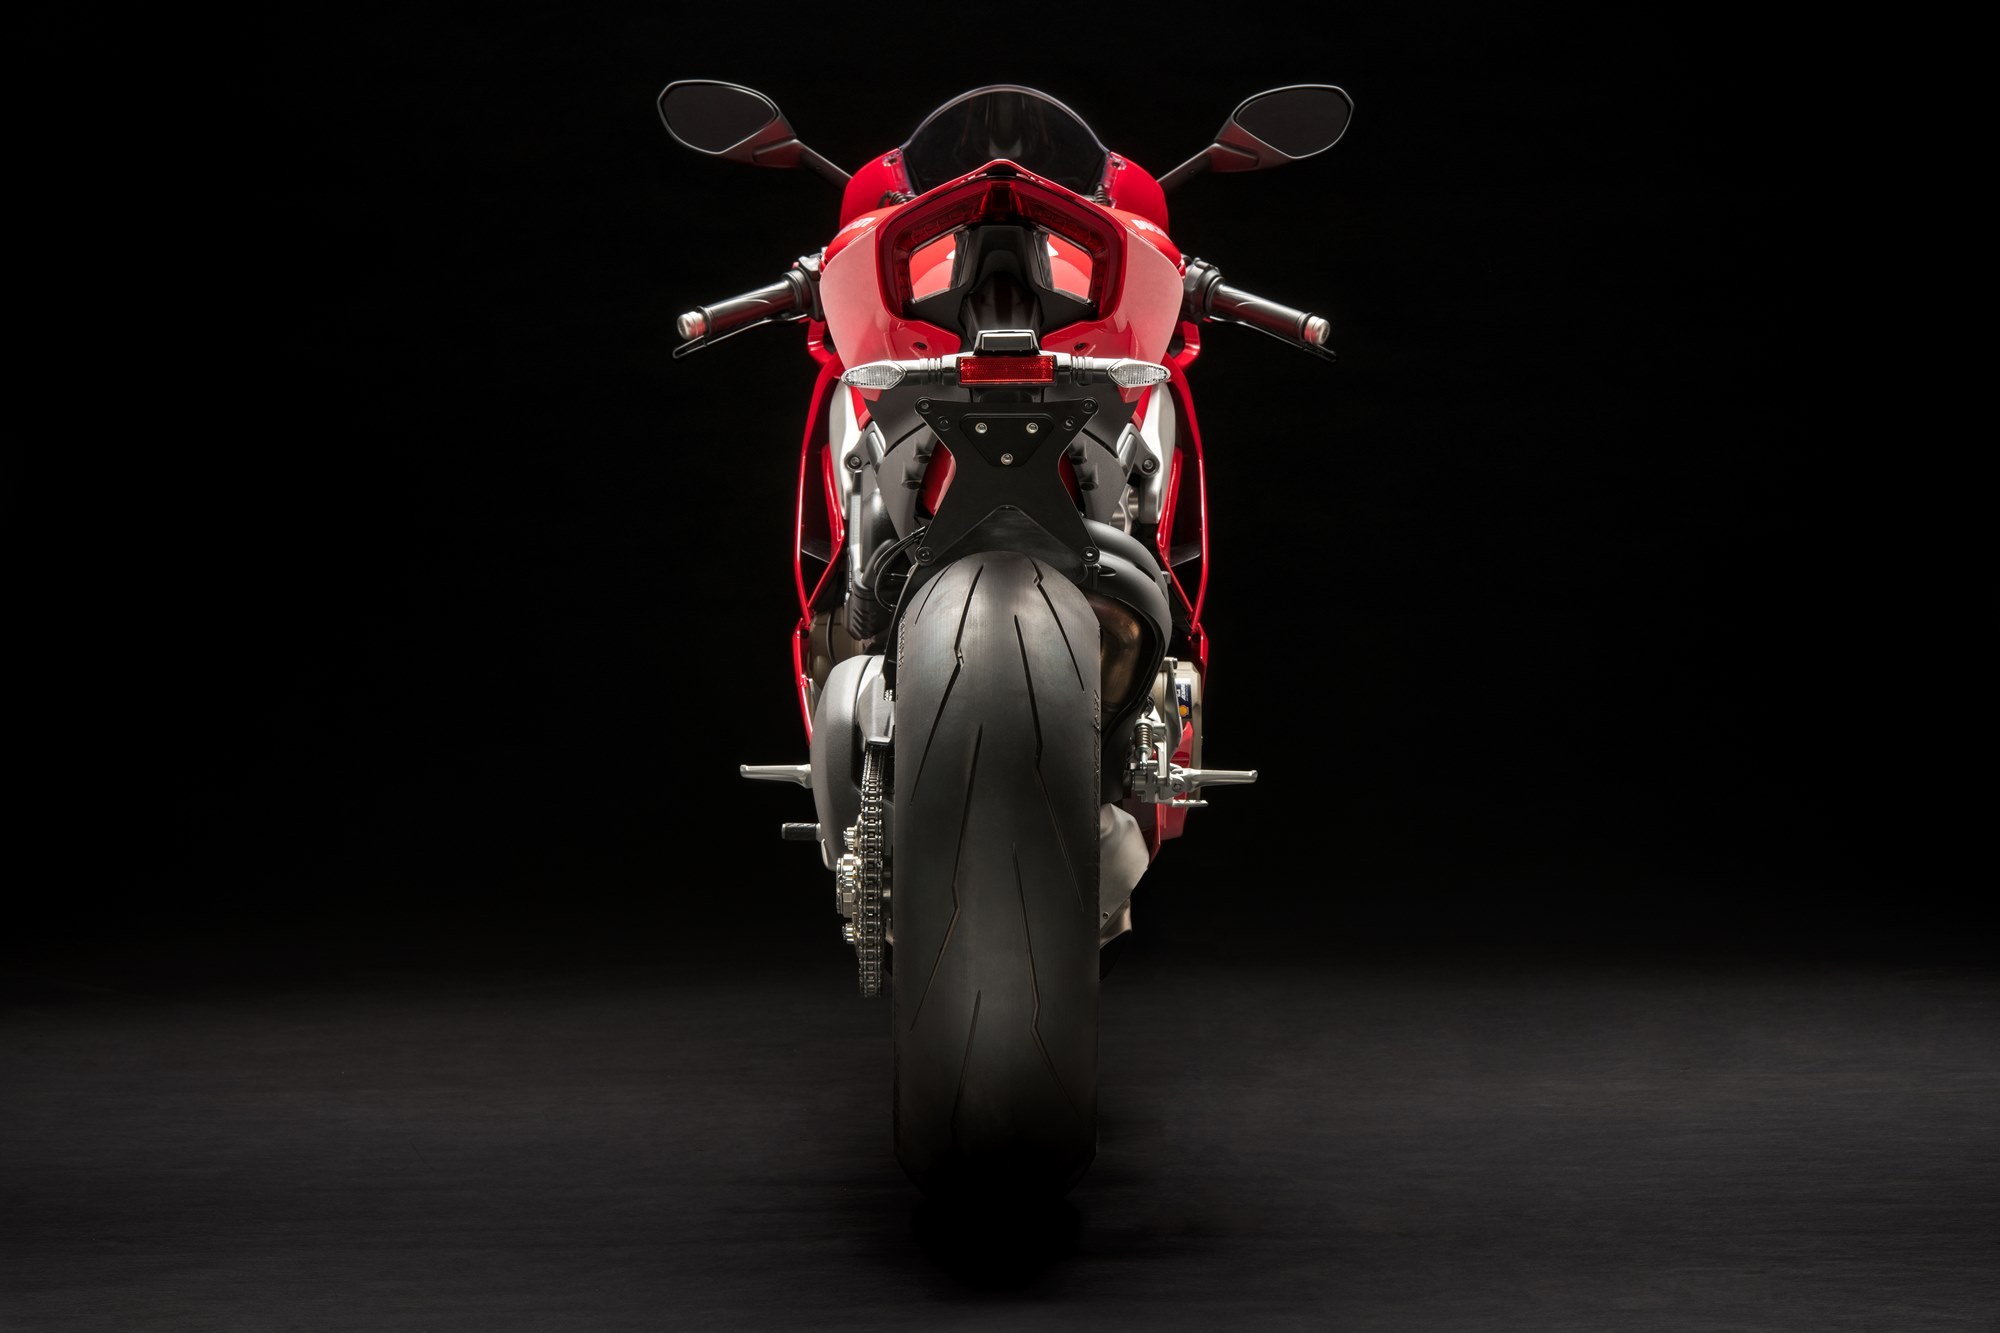 Ducati Panigale V4 S Images - Ducati Panigale V4 , HD Wallpaper & Backgrounds